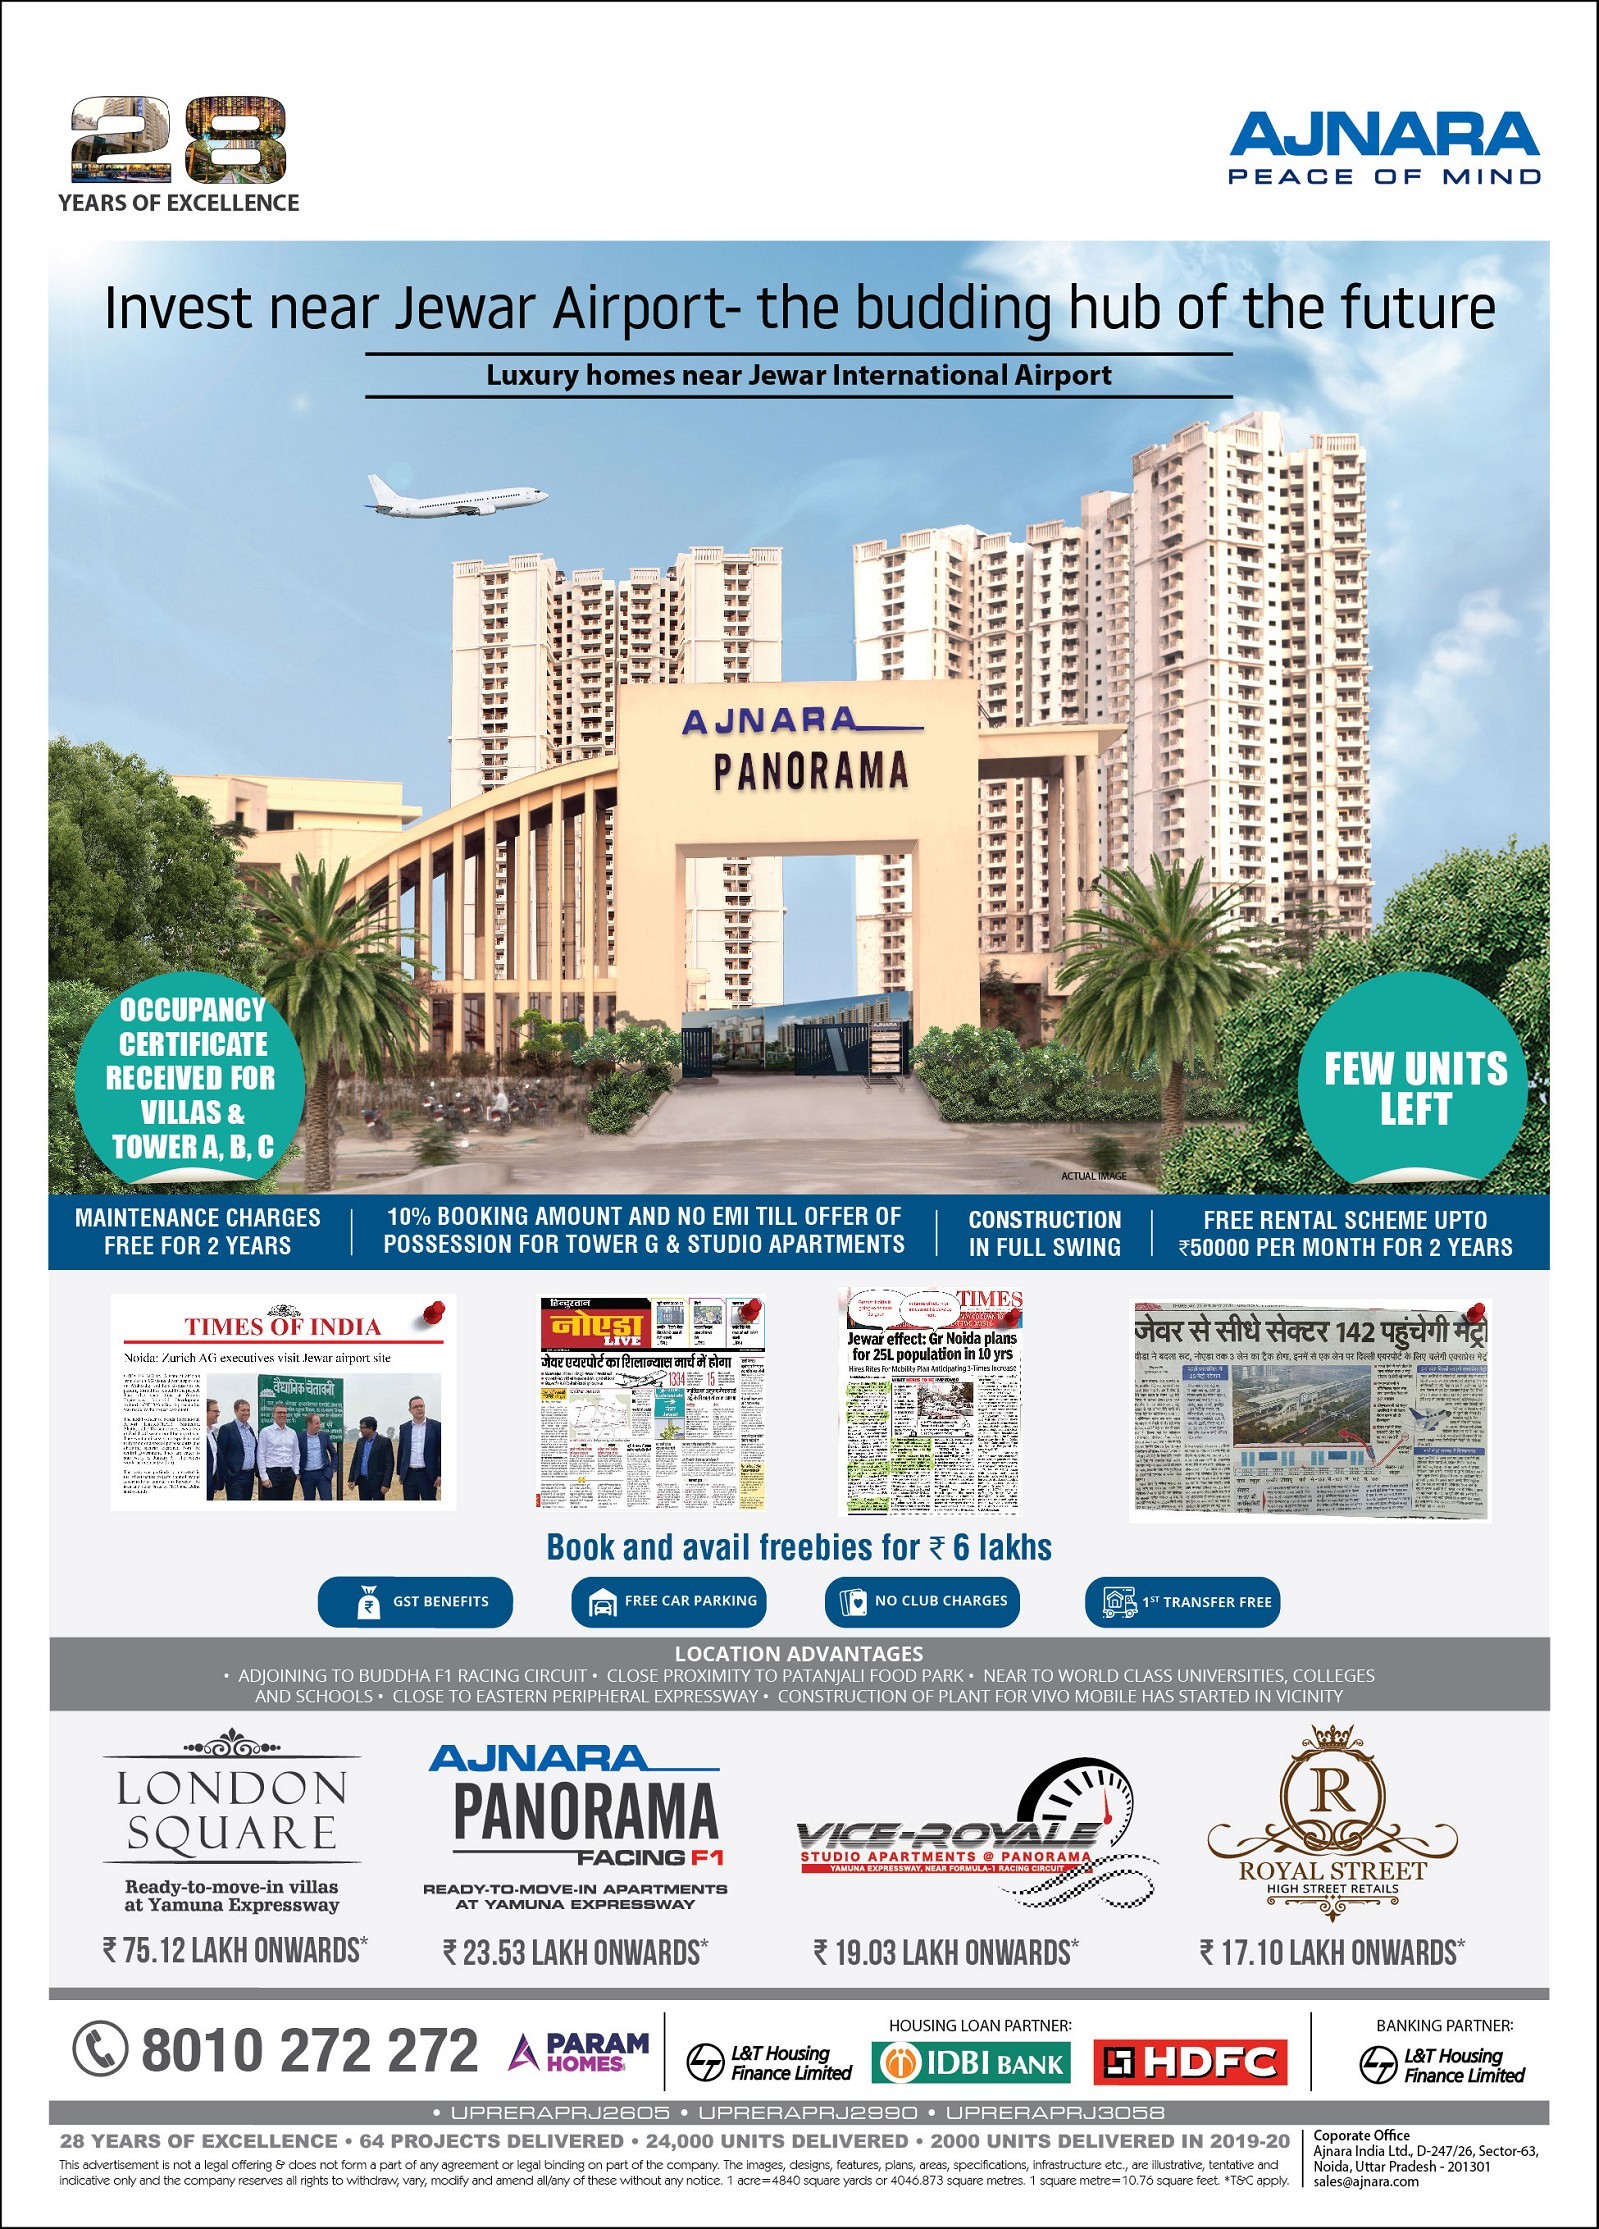  Invest Near Jewar Airport - The Building Hub of the Future